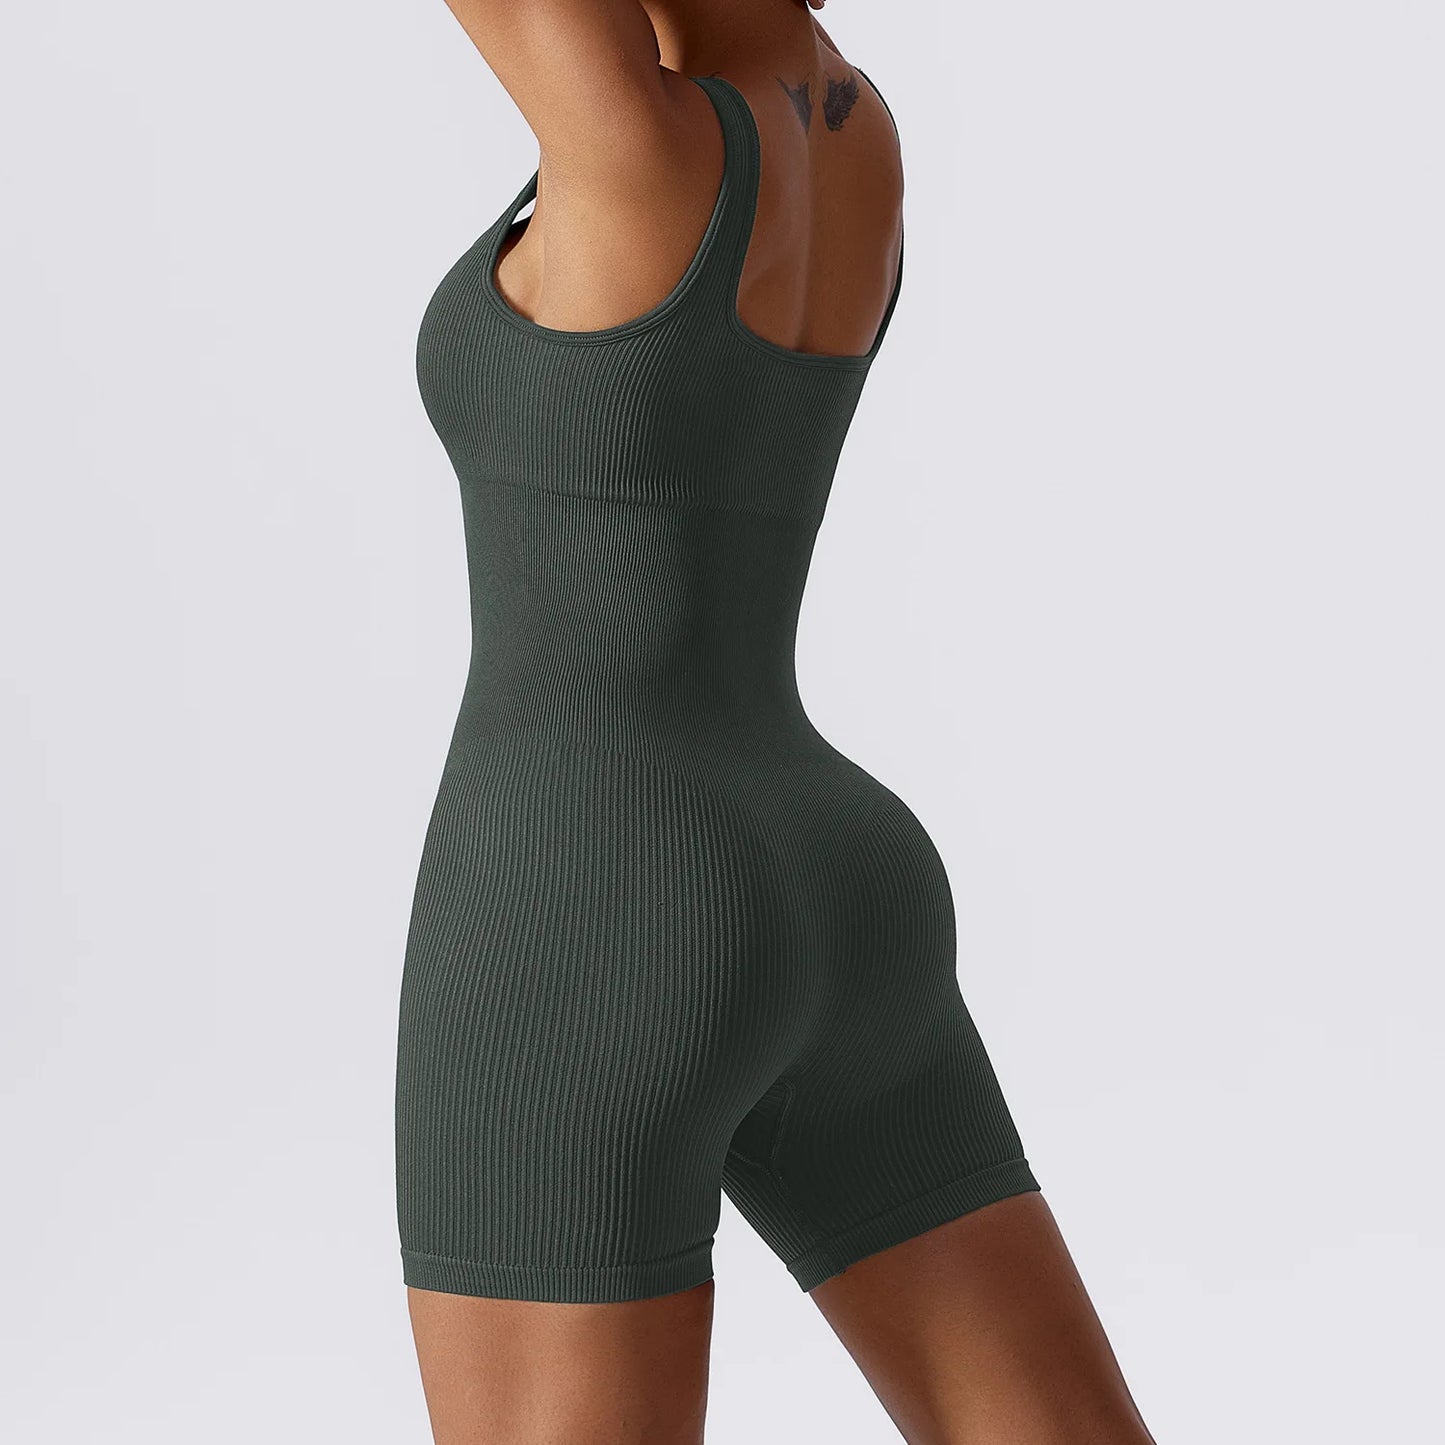 Women's One Piece Seamless Yoga Rompers